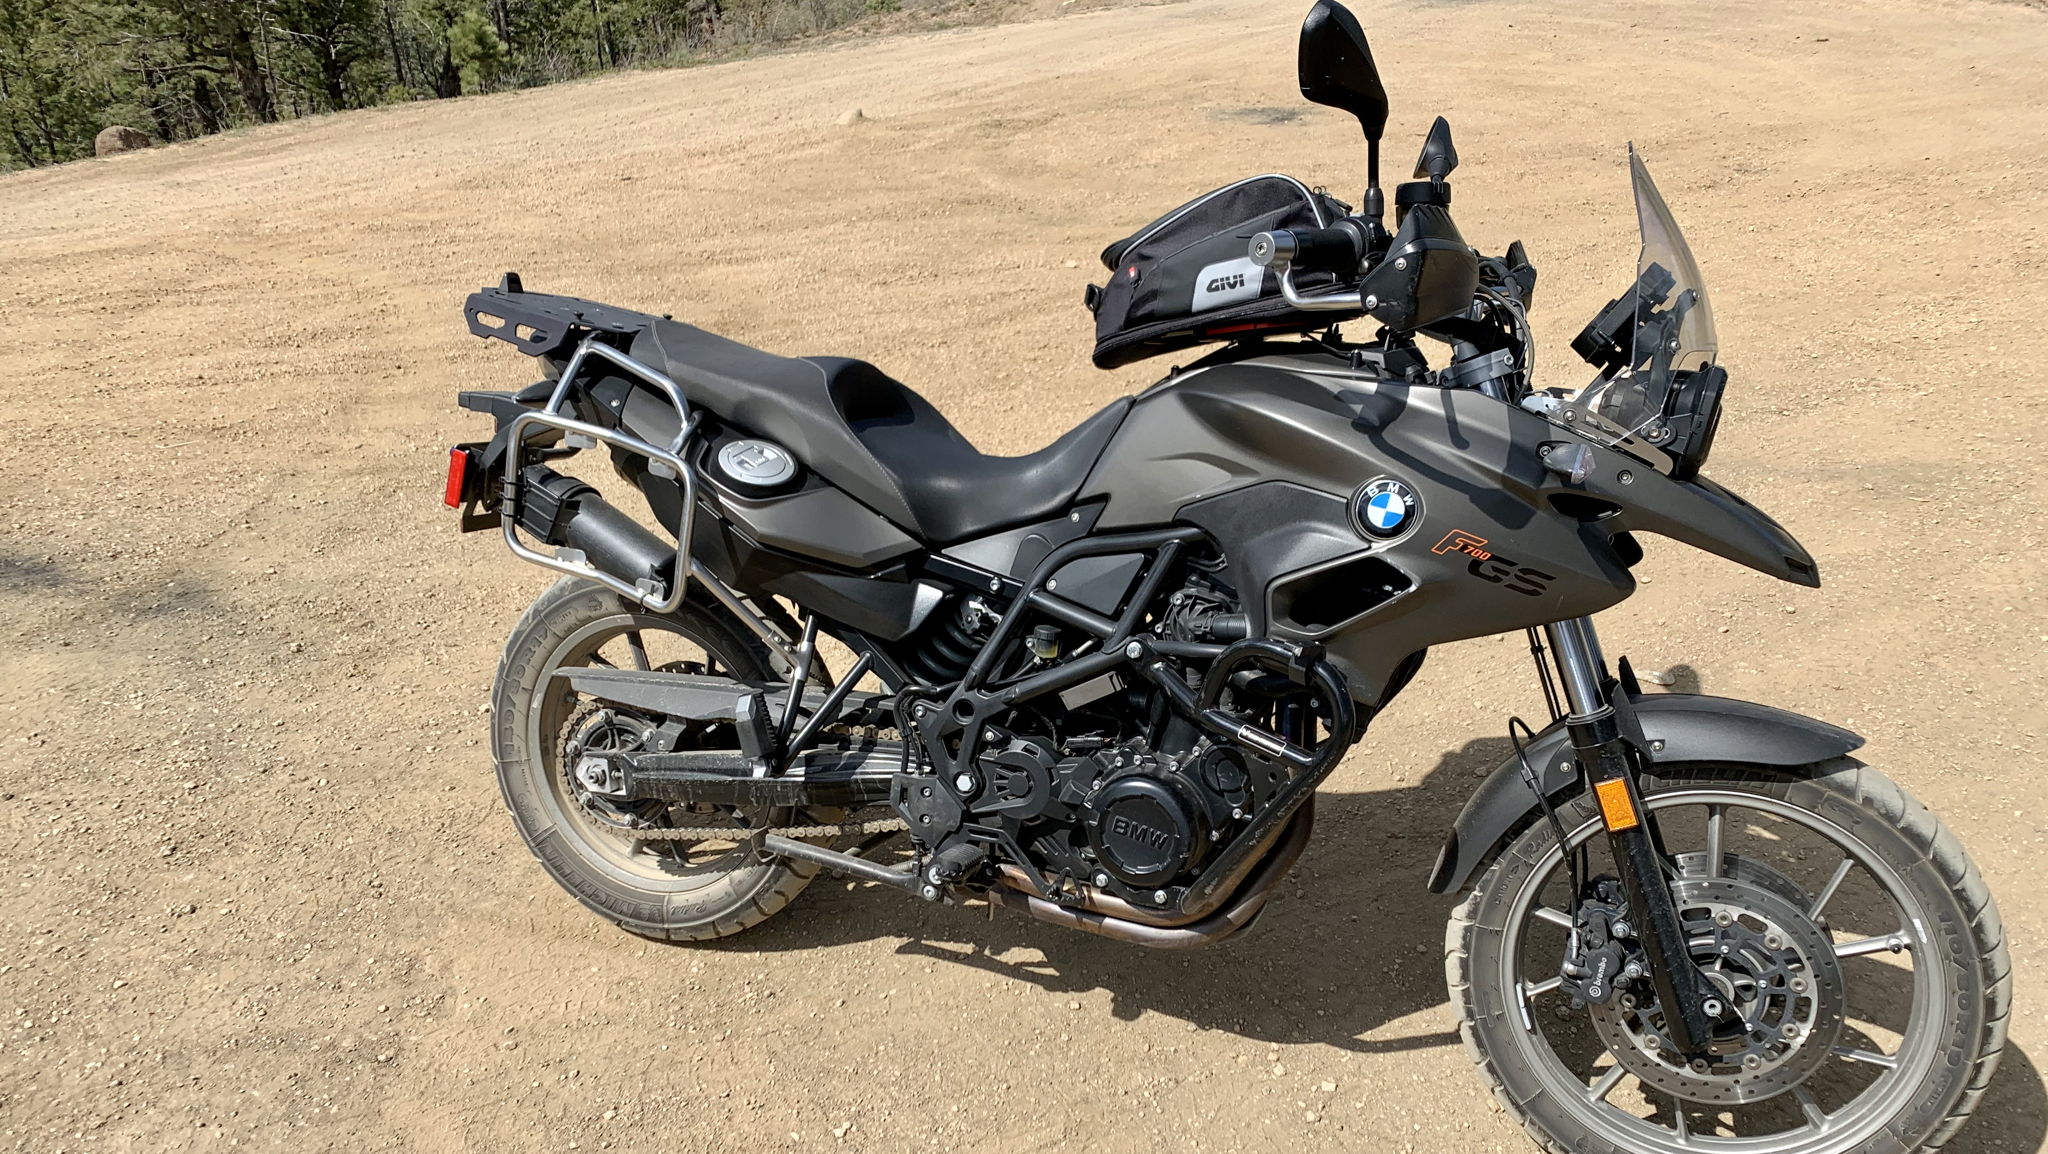 BMW F 700 GS for rent near Falcon, CO Riders Share